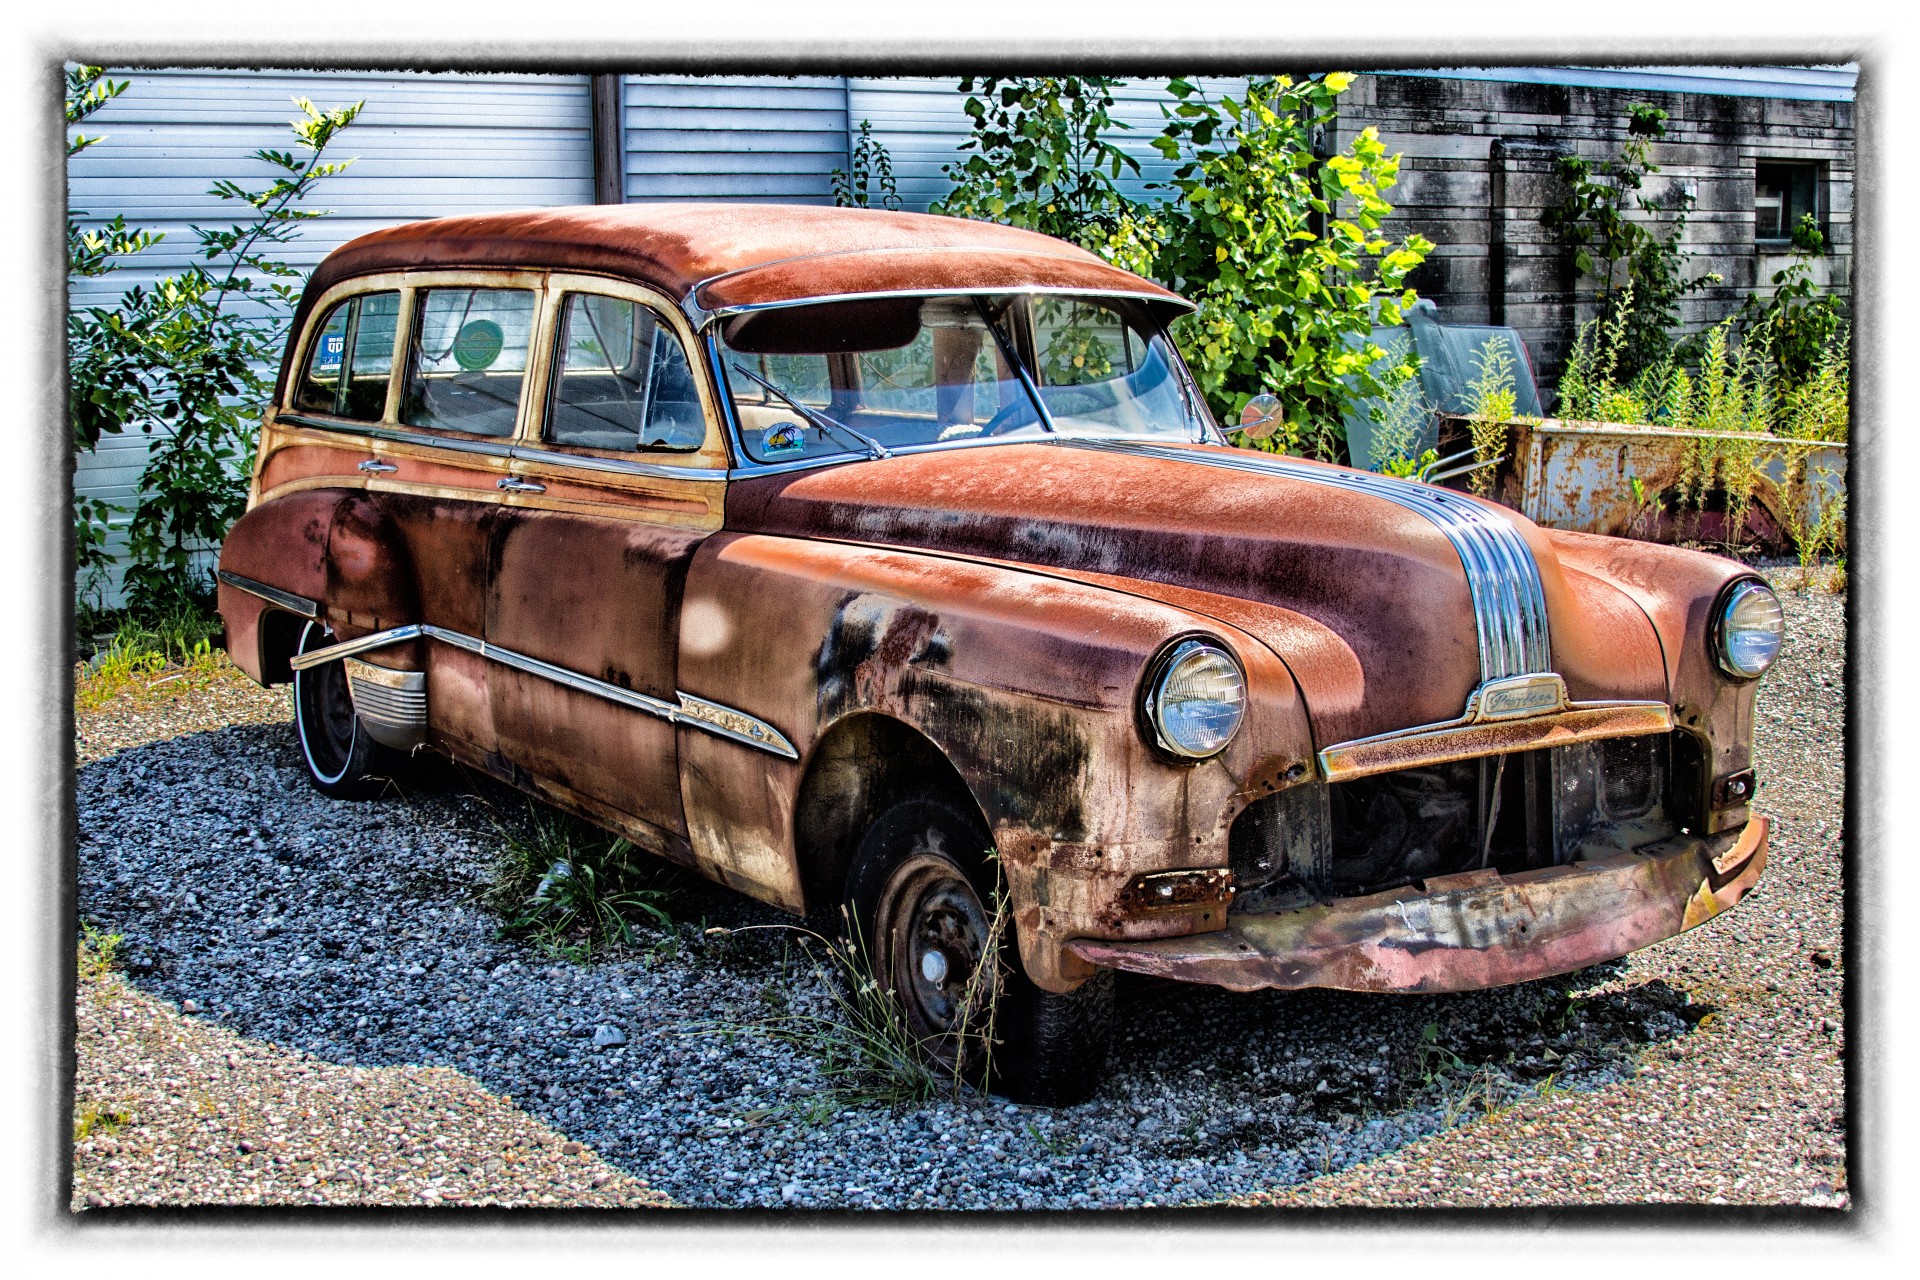 Decaying Automobile